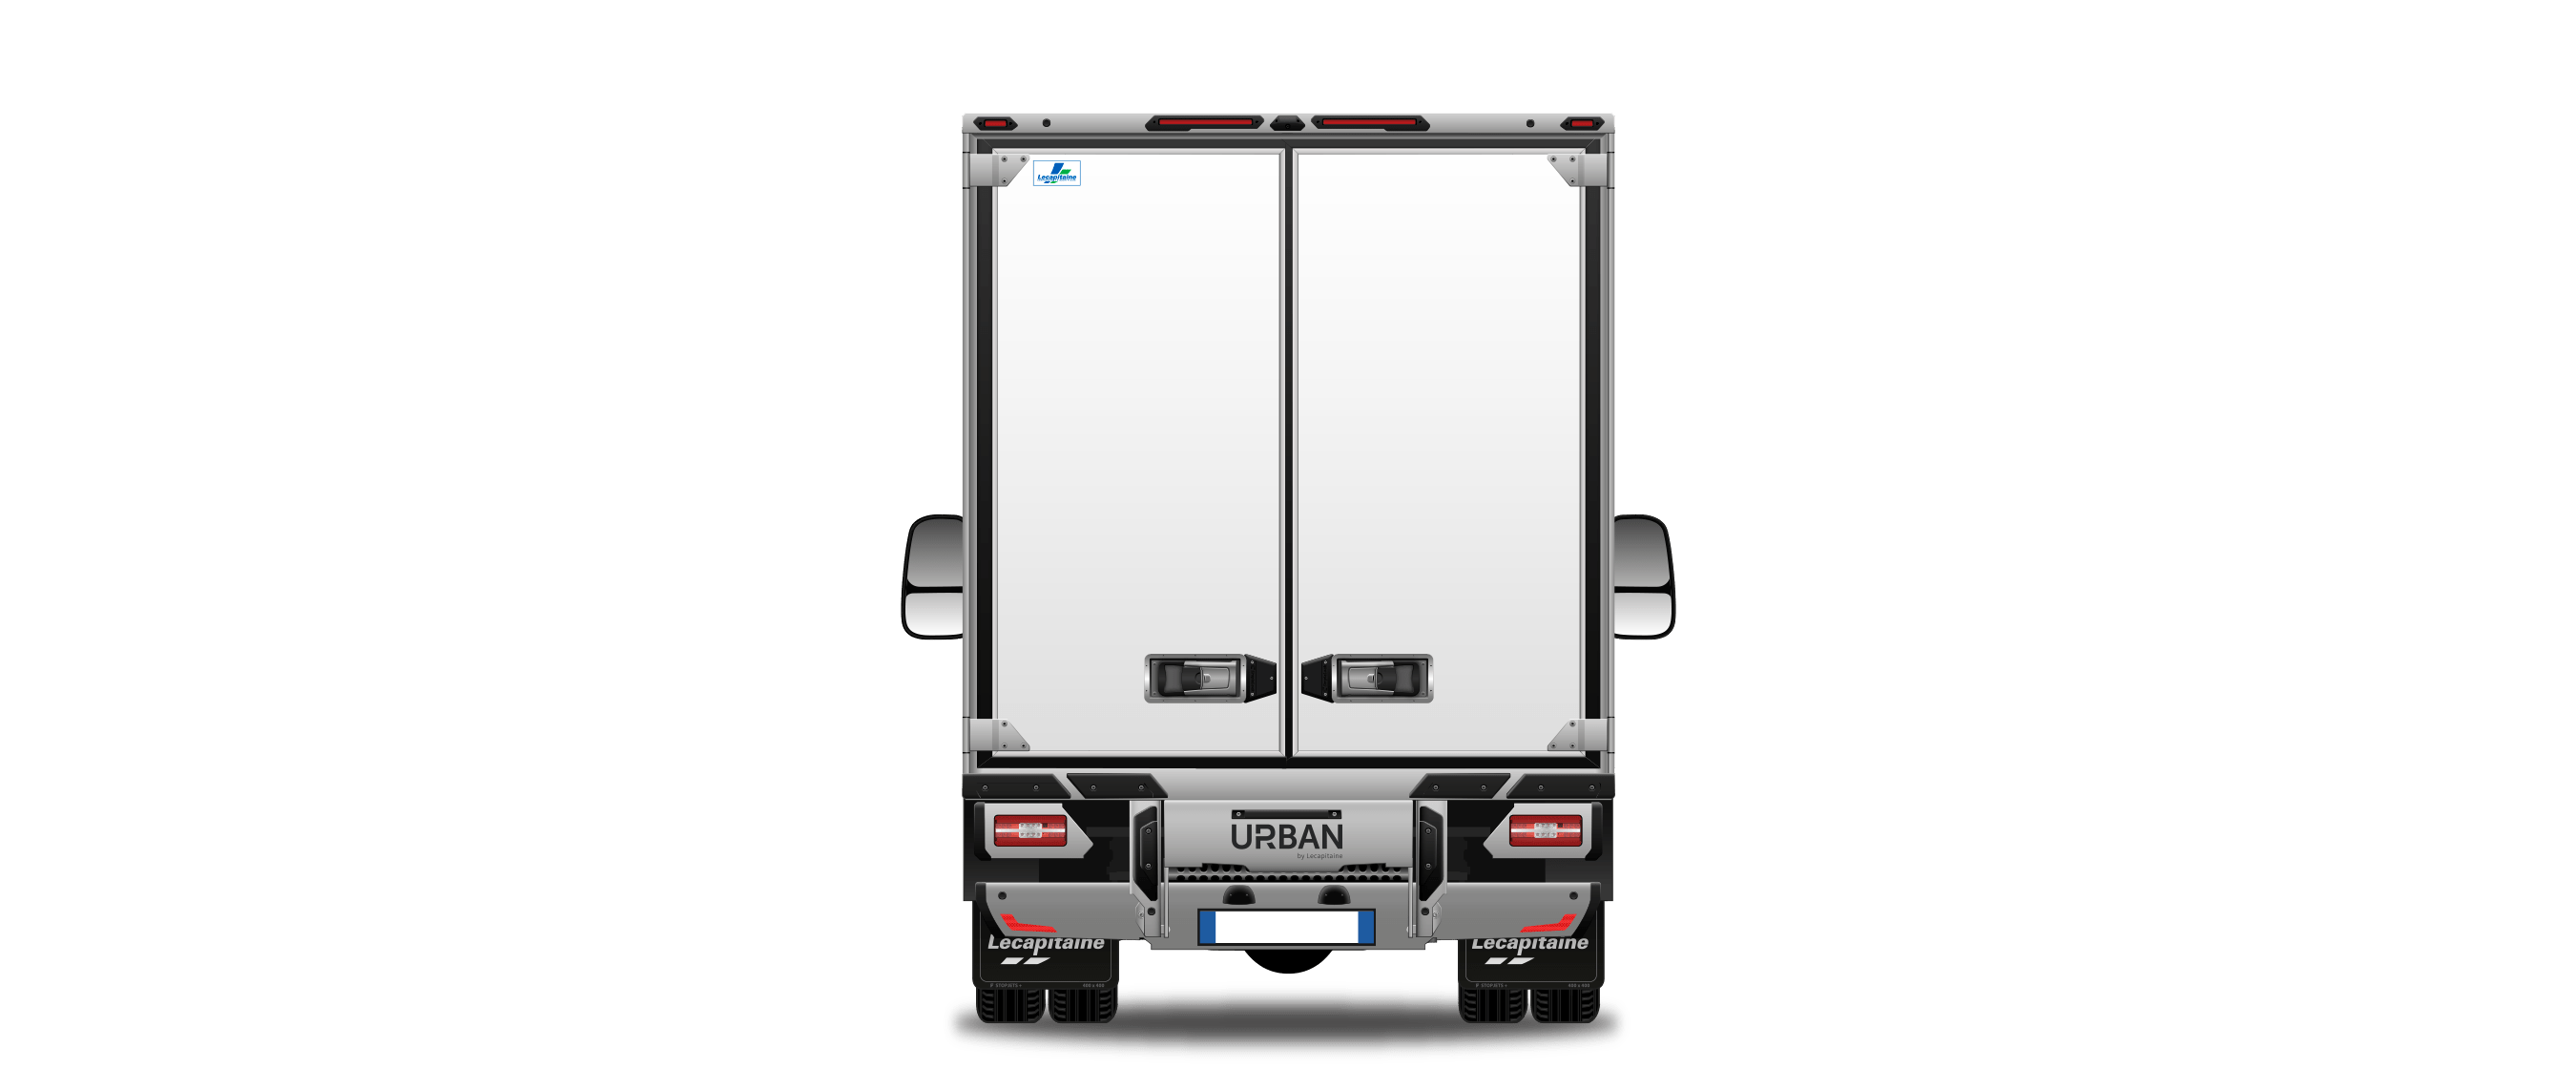 iveco daily 35c